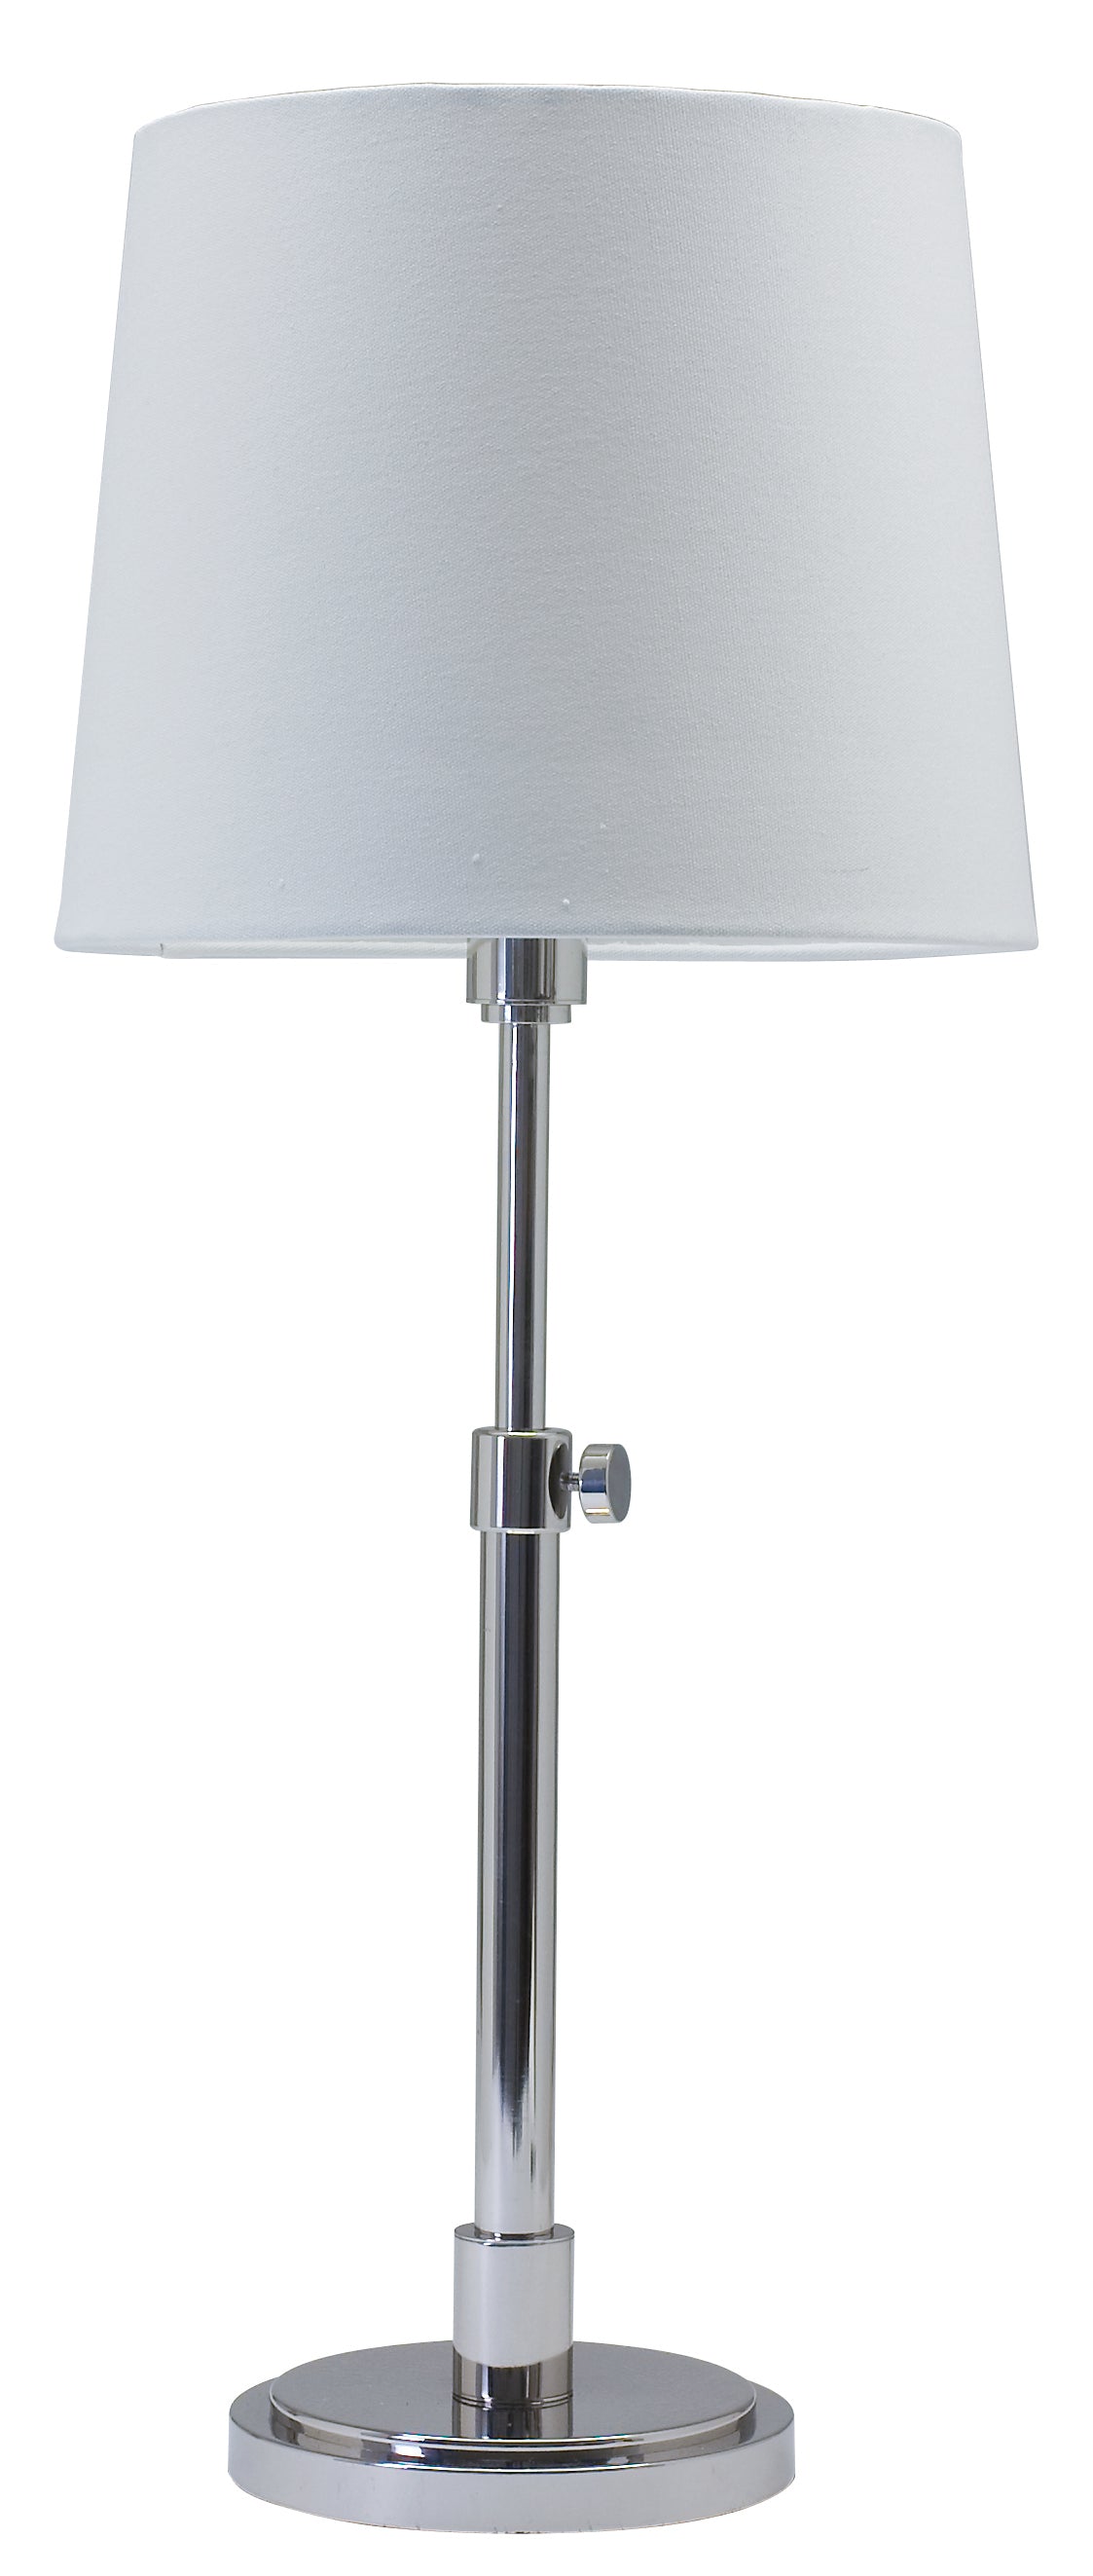 House of Troy Townhouse Adjustable Table Lamp Polished Nickel TH750-PN